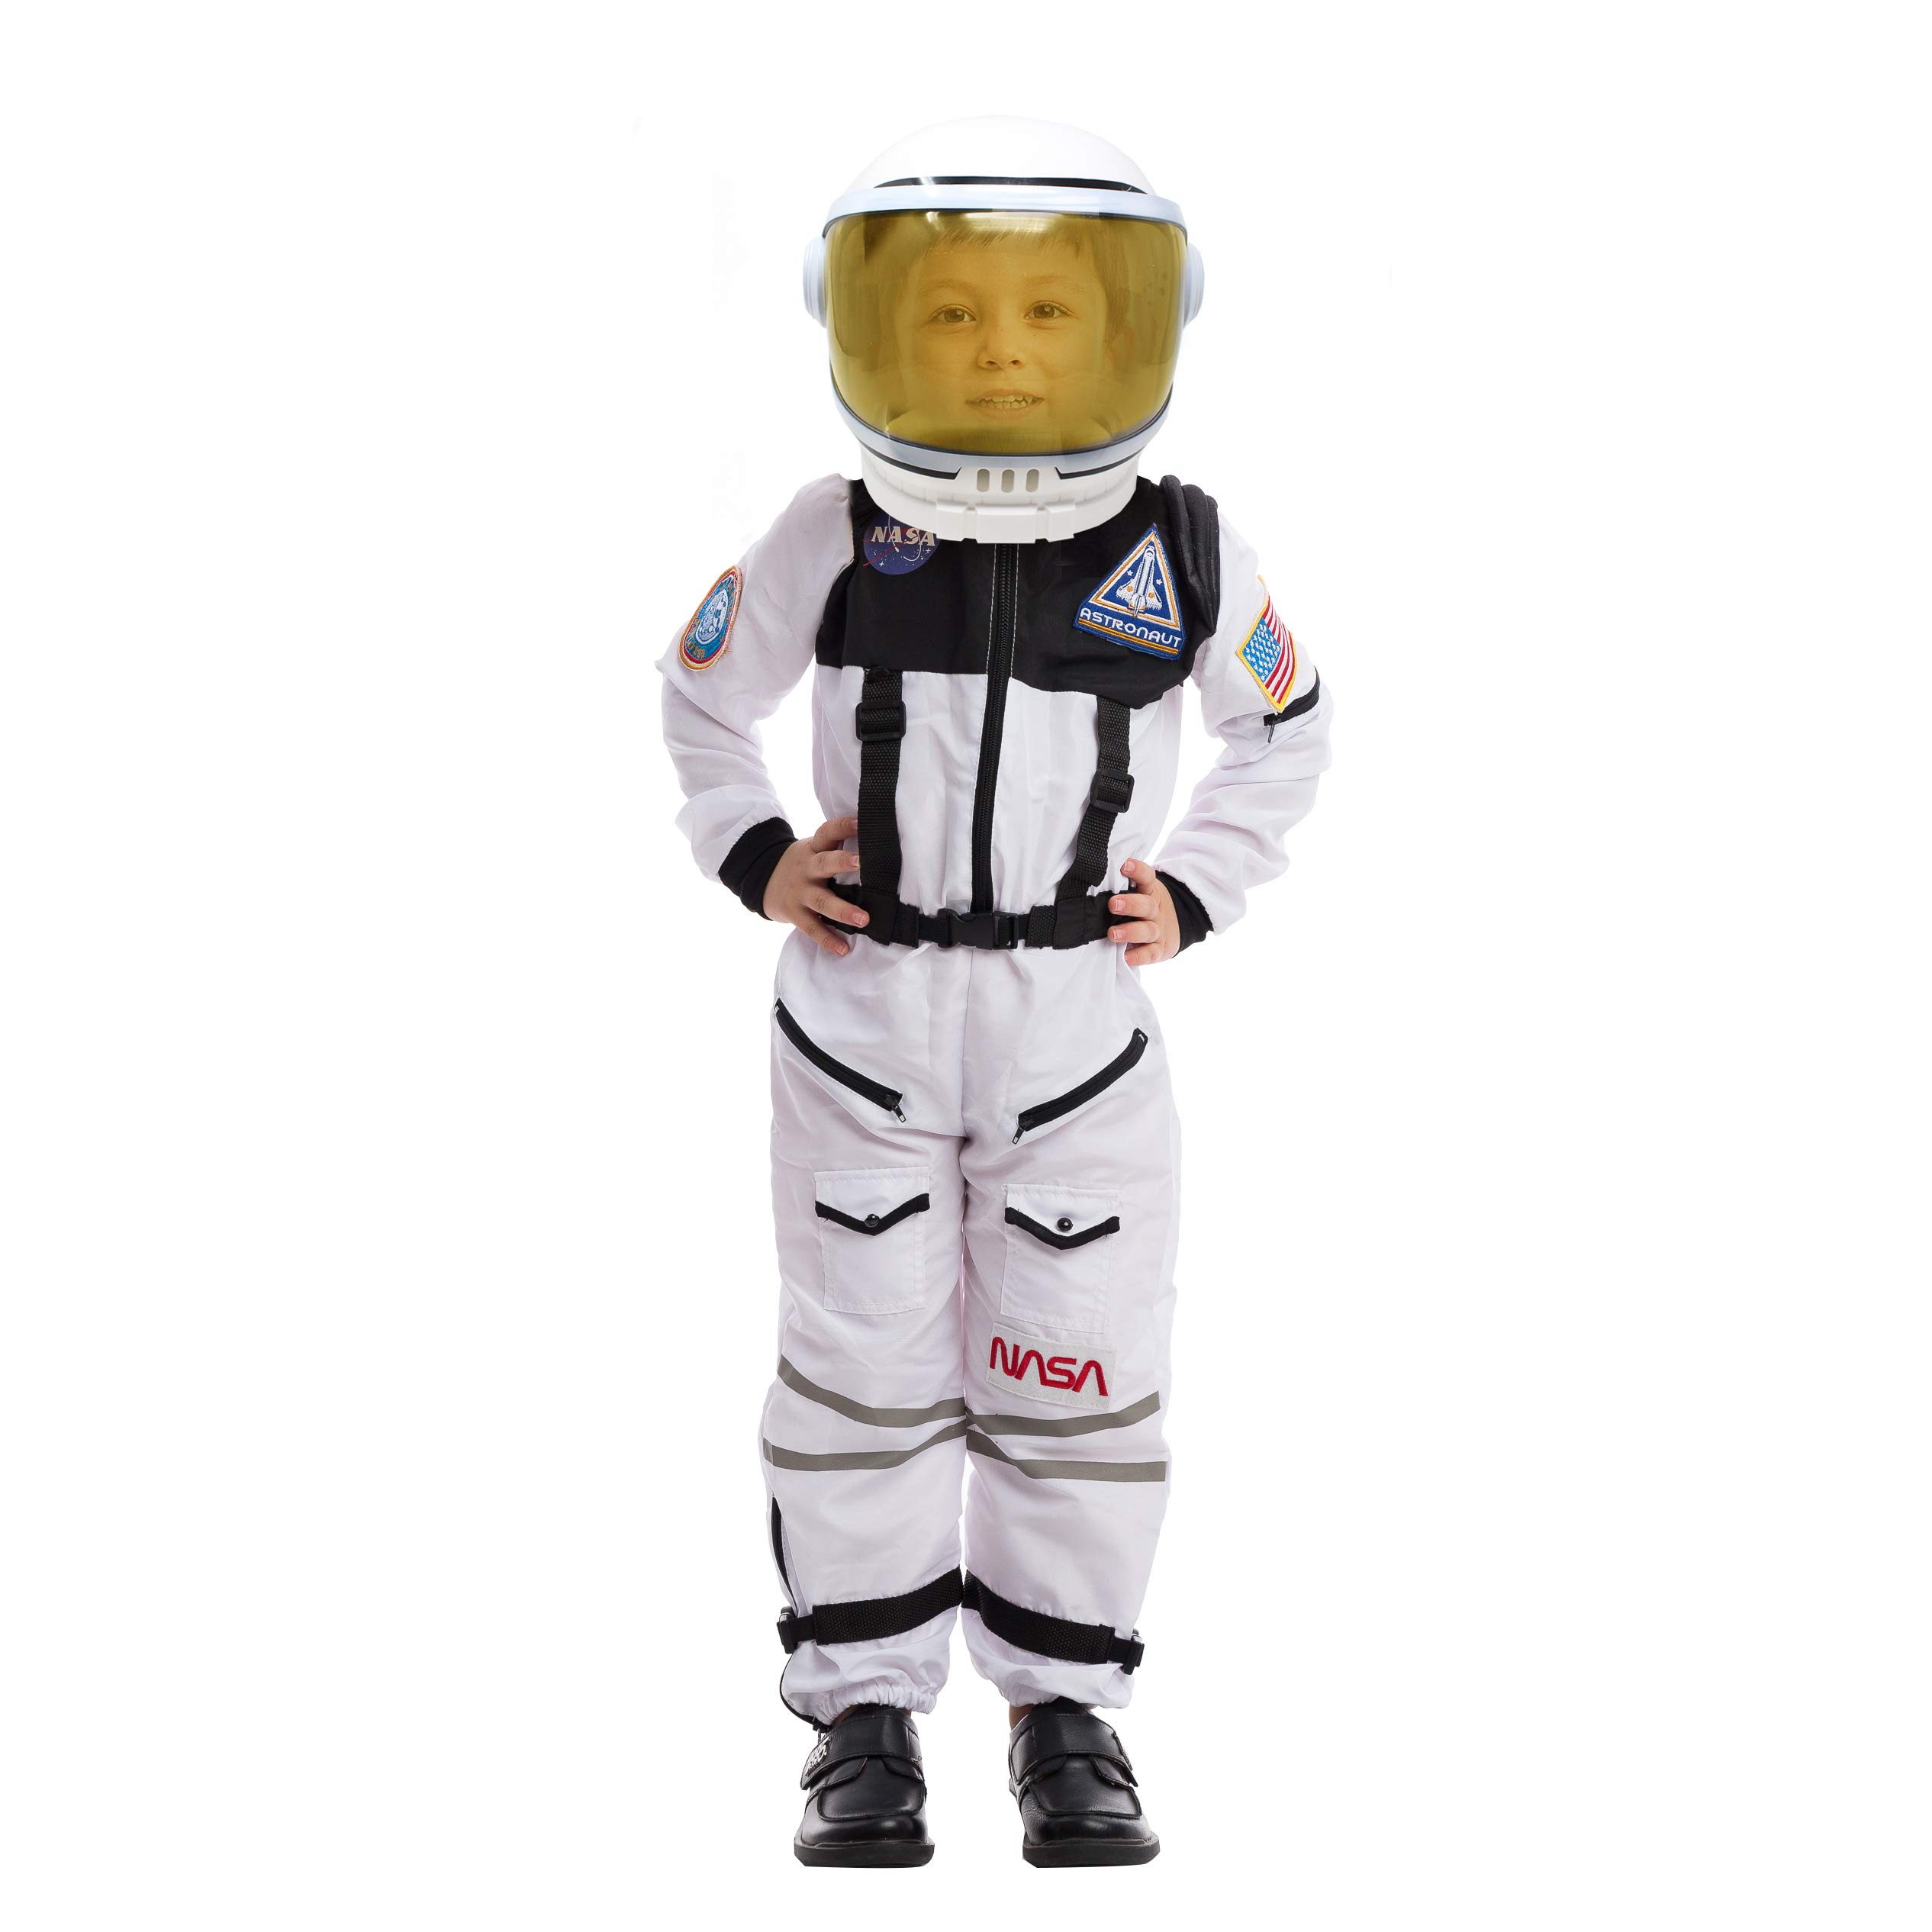 Spooktacular Creations Astronaut Costume with Helmet for Kids, Space Suit, Space Jumpsuit for Halloween Boys Girls Pretend Role Play Dress Up (White)-S